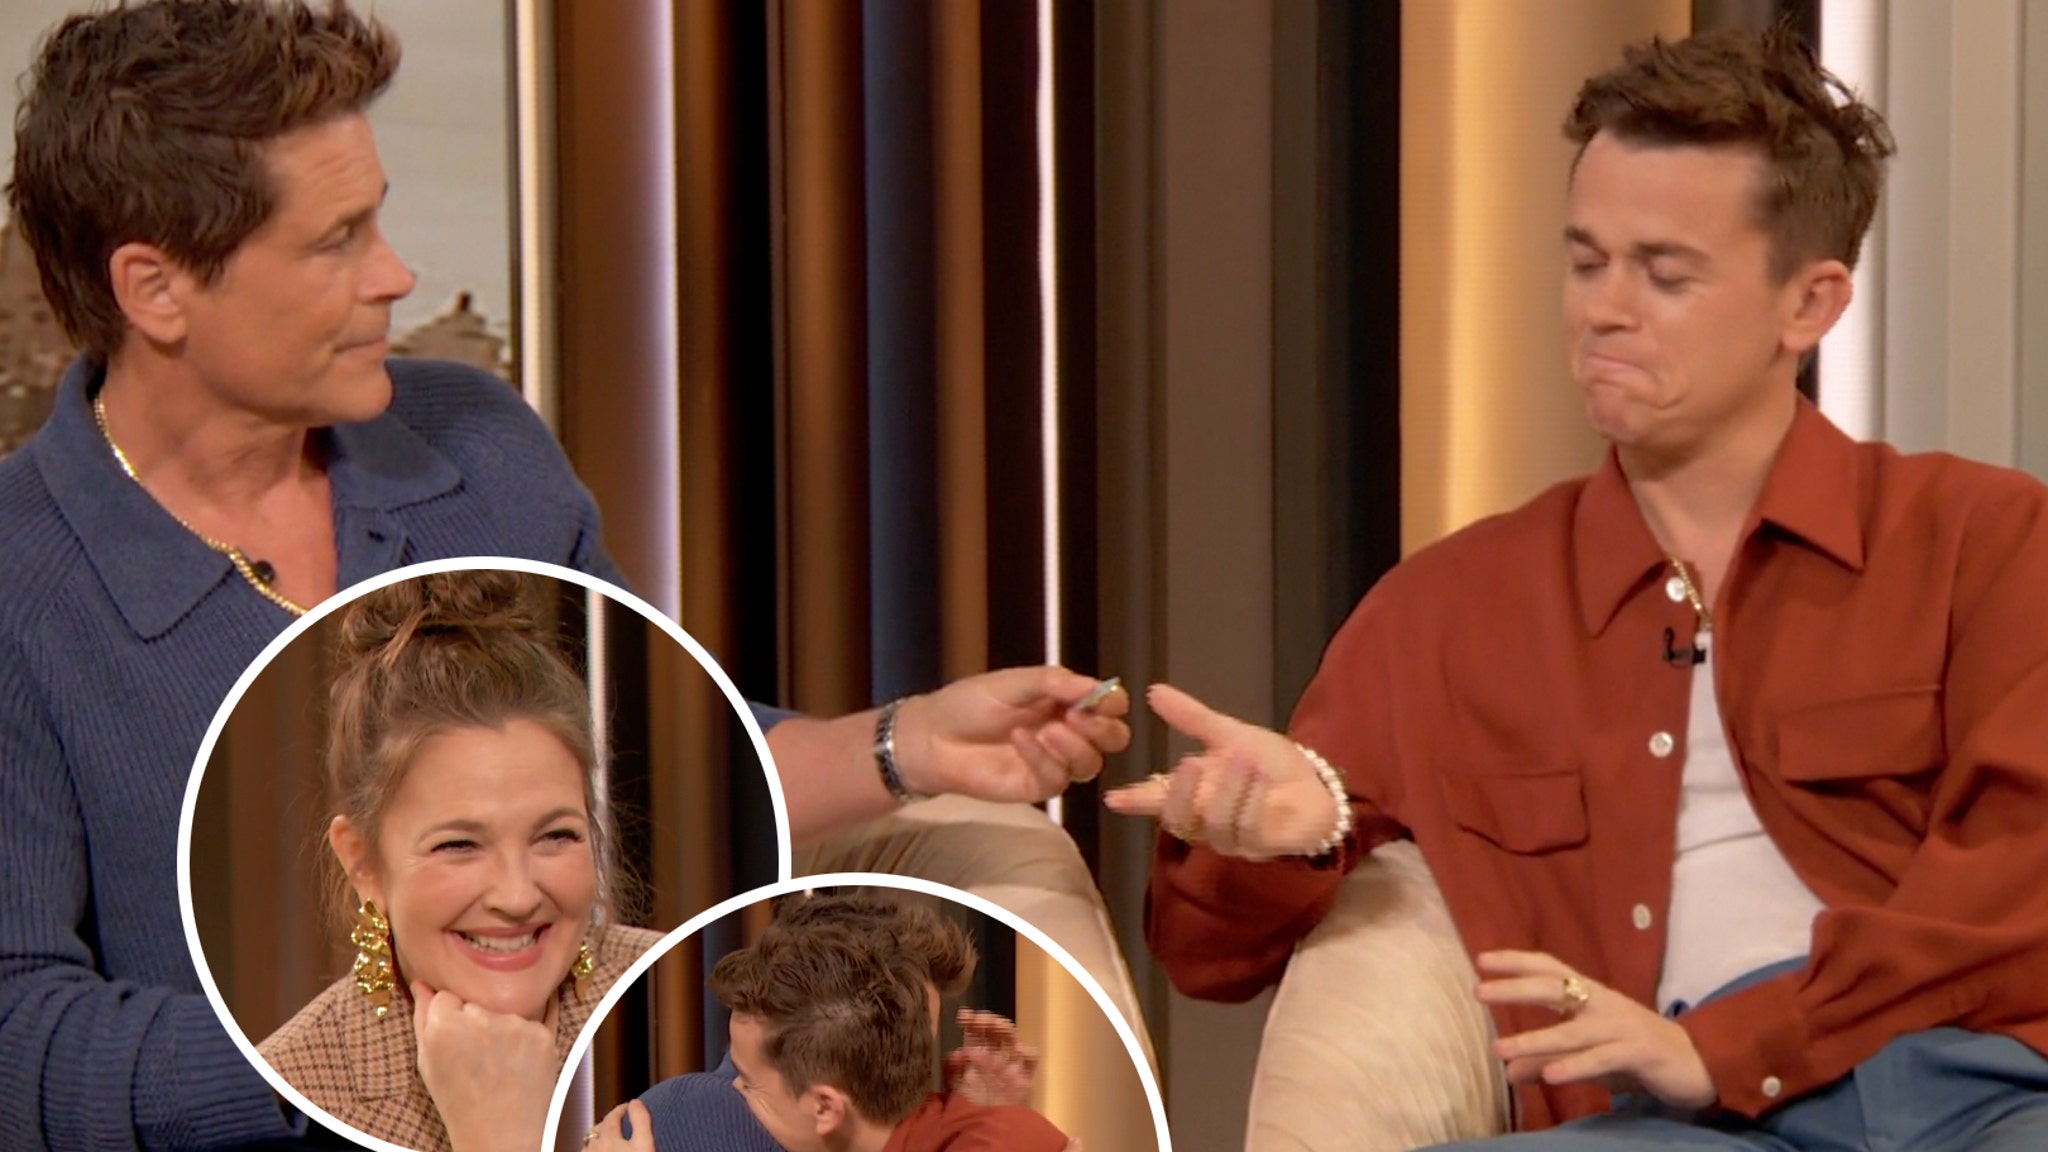 Rob Lowe Surprises Son with 5&Year Sobriety Chip During Drew Barrymore Show Appearance